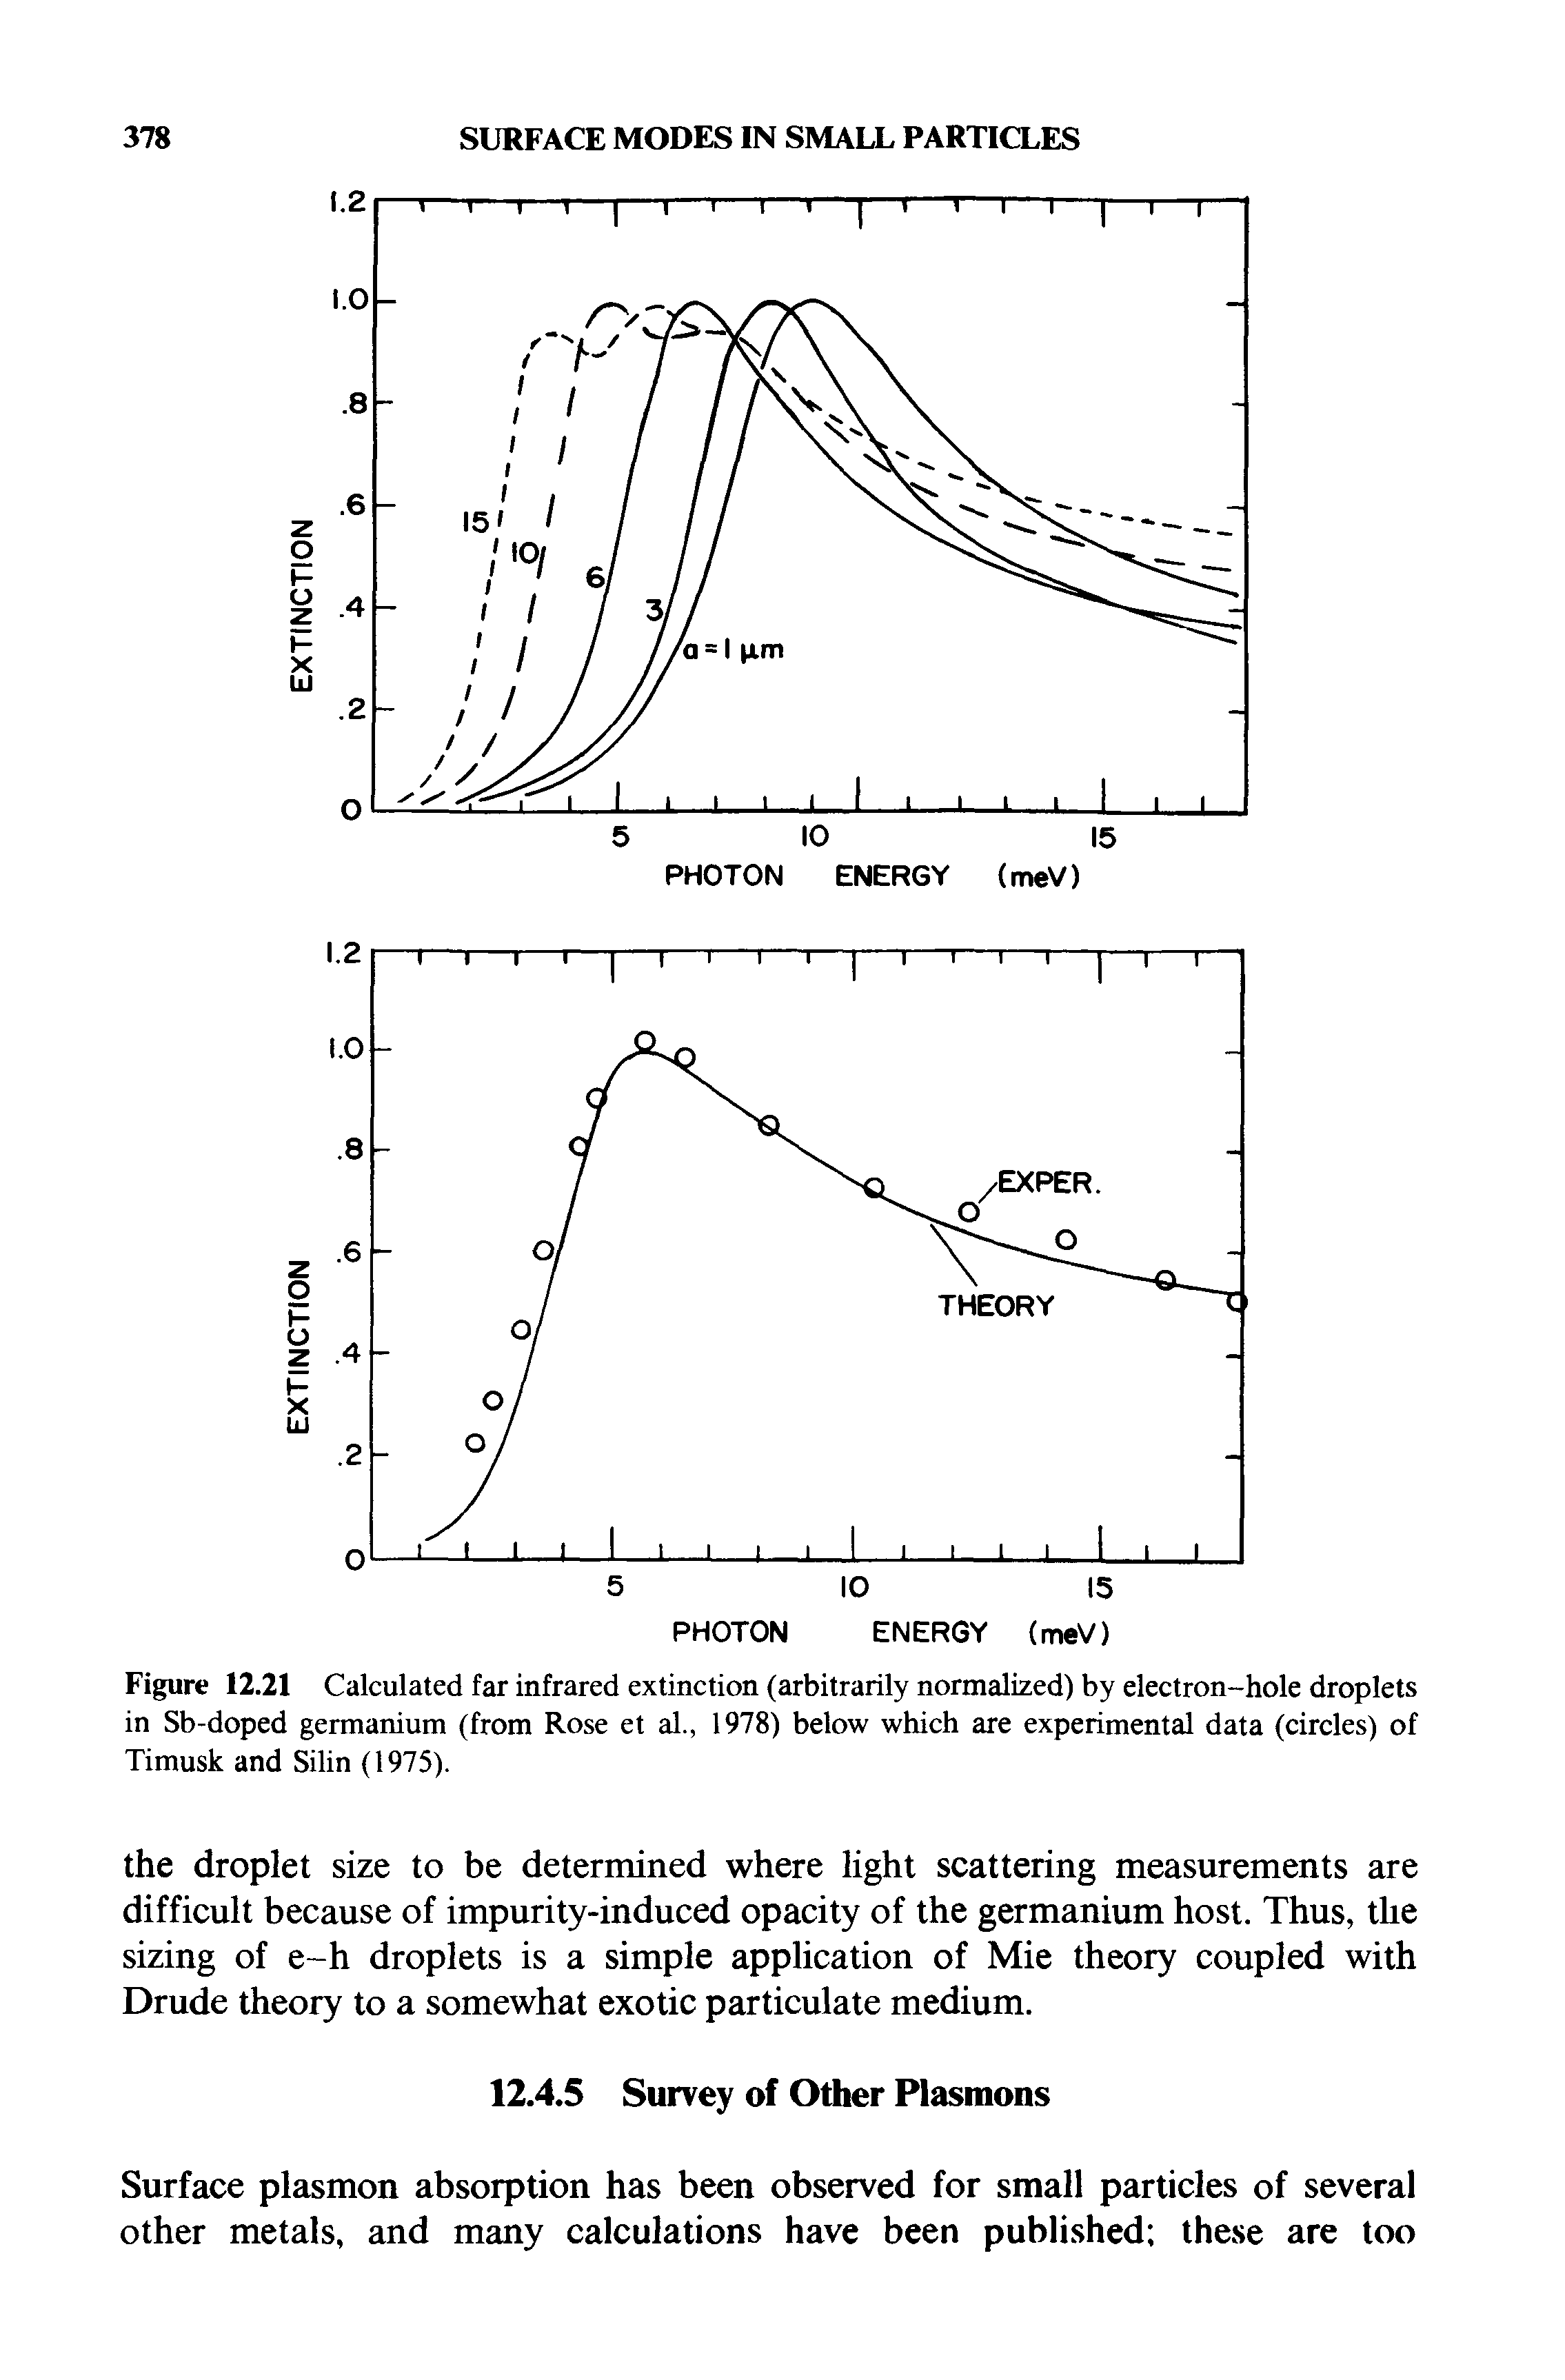 Figure 12.21 Calculated far infrared extinction (arbitrarily normalized) by electron-hole droplets in Sb-doped germanium (from Rose et al., 1978) below which are experimental data (circles) of Timusk and Silin (1975).